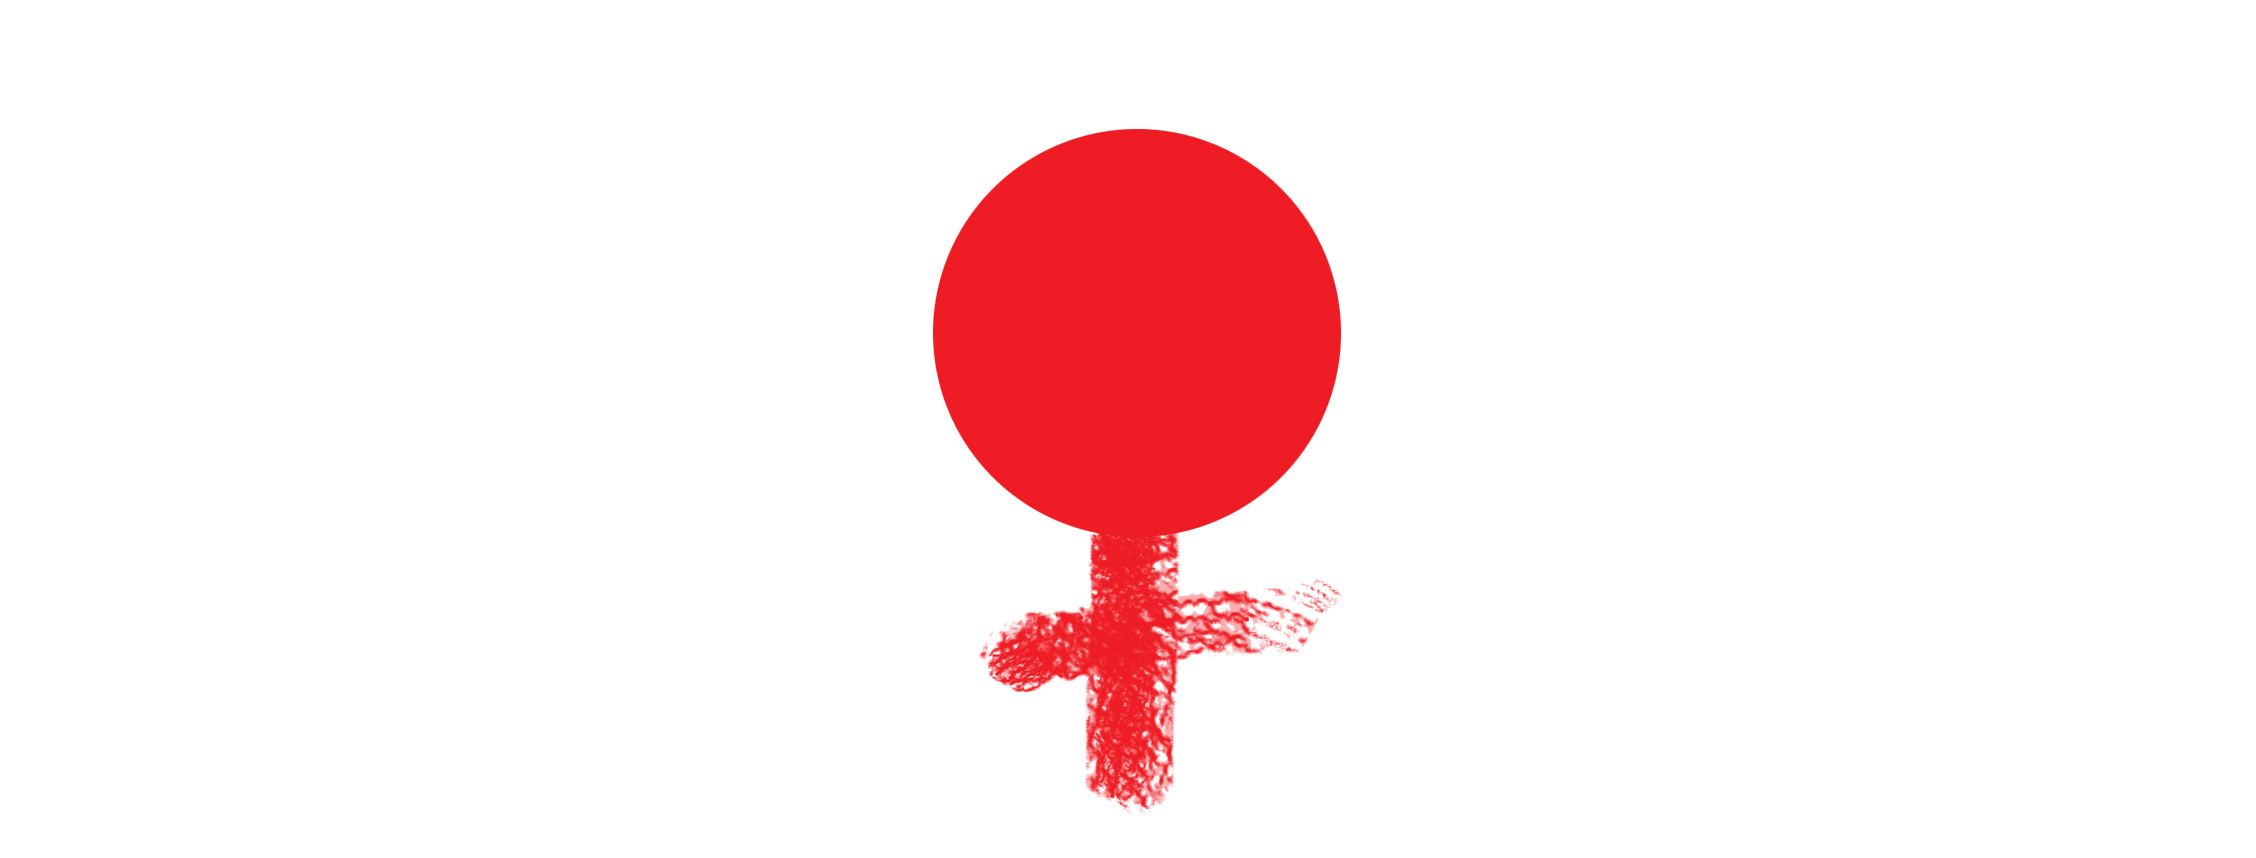 Open Letter to the Japanese government calling for a comprehensive solution to the “Comfort Women” issue